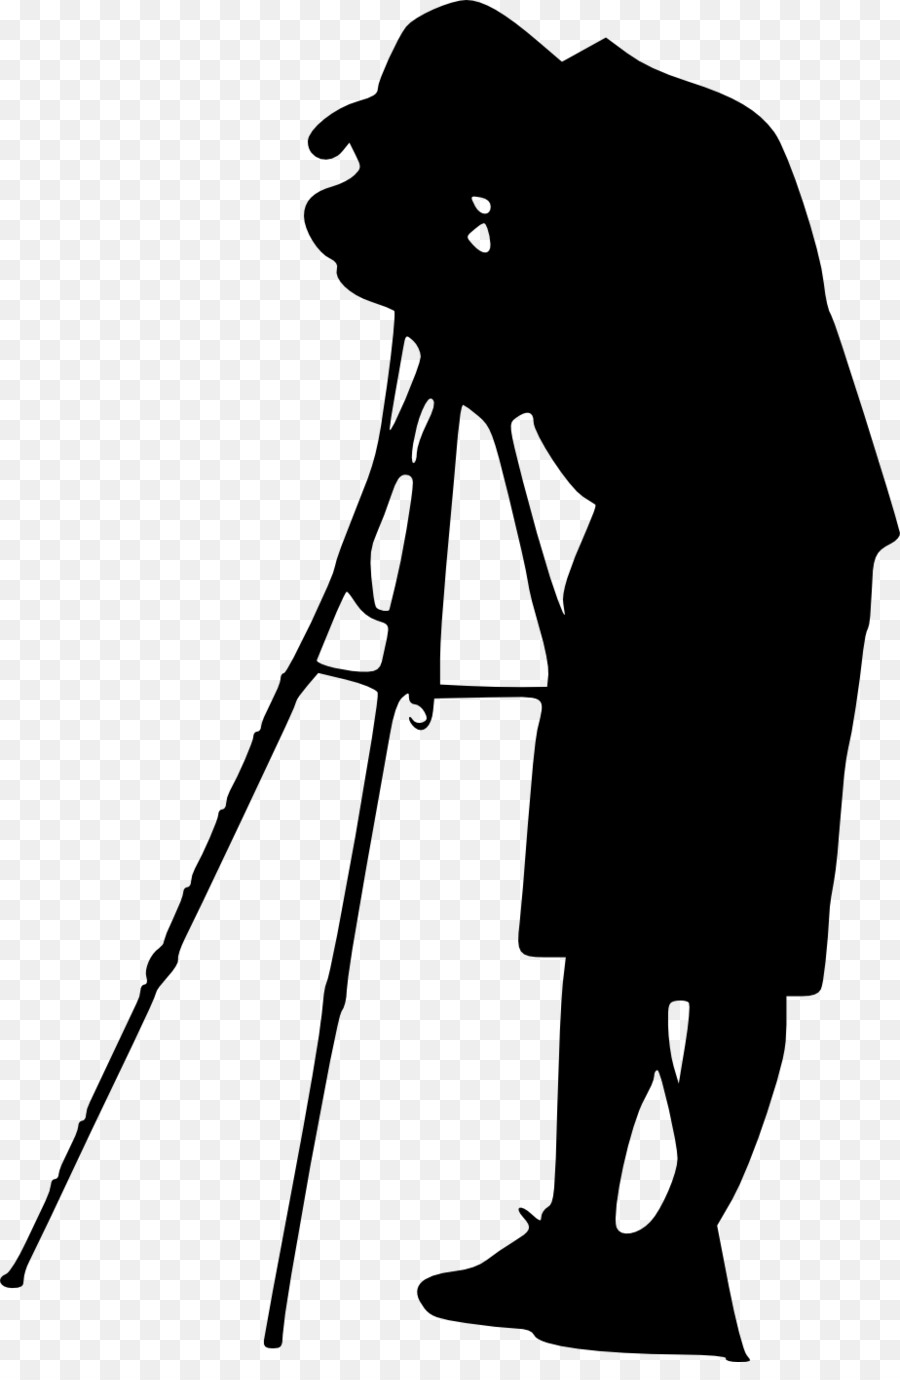 Silhouette Photography Photographer Clip art - photographer png download - 924*1398 - Free Transparent Silhouette png Download.